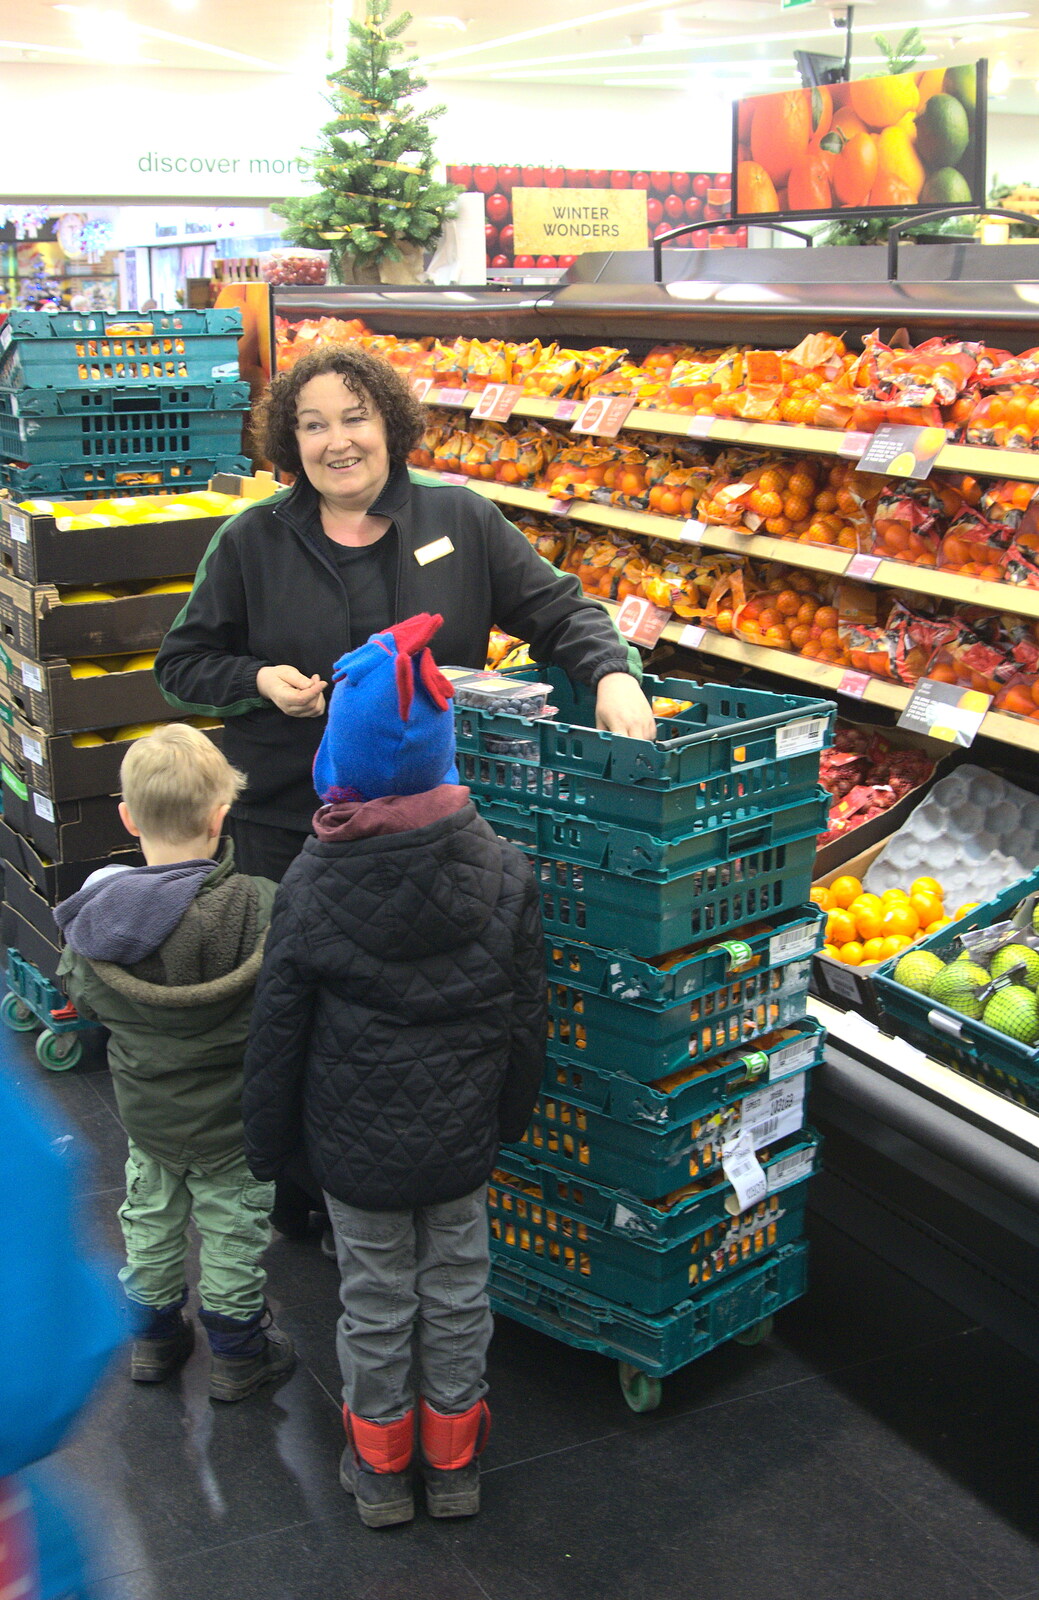 Louise stacks fruit in Marks and Spencer from Conwy, Holyhead and the Ferry to Ireland - 21st December 2015